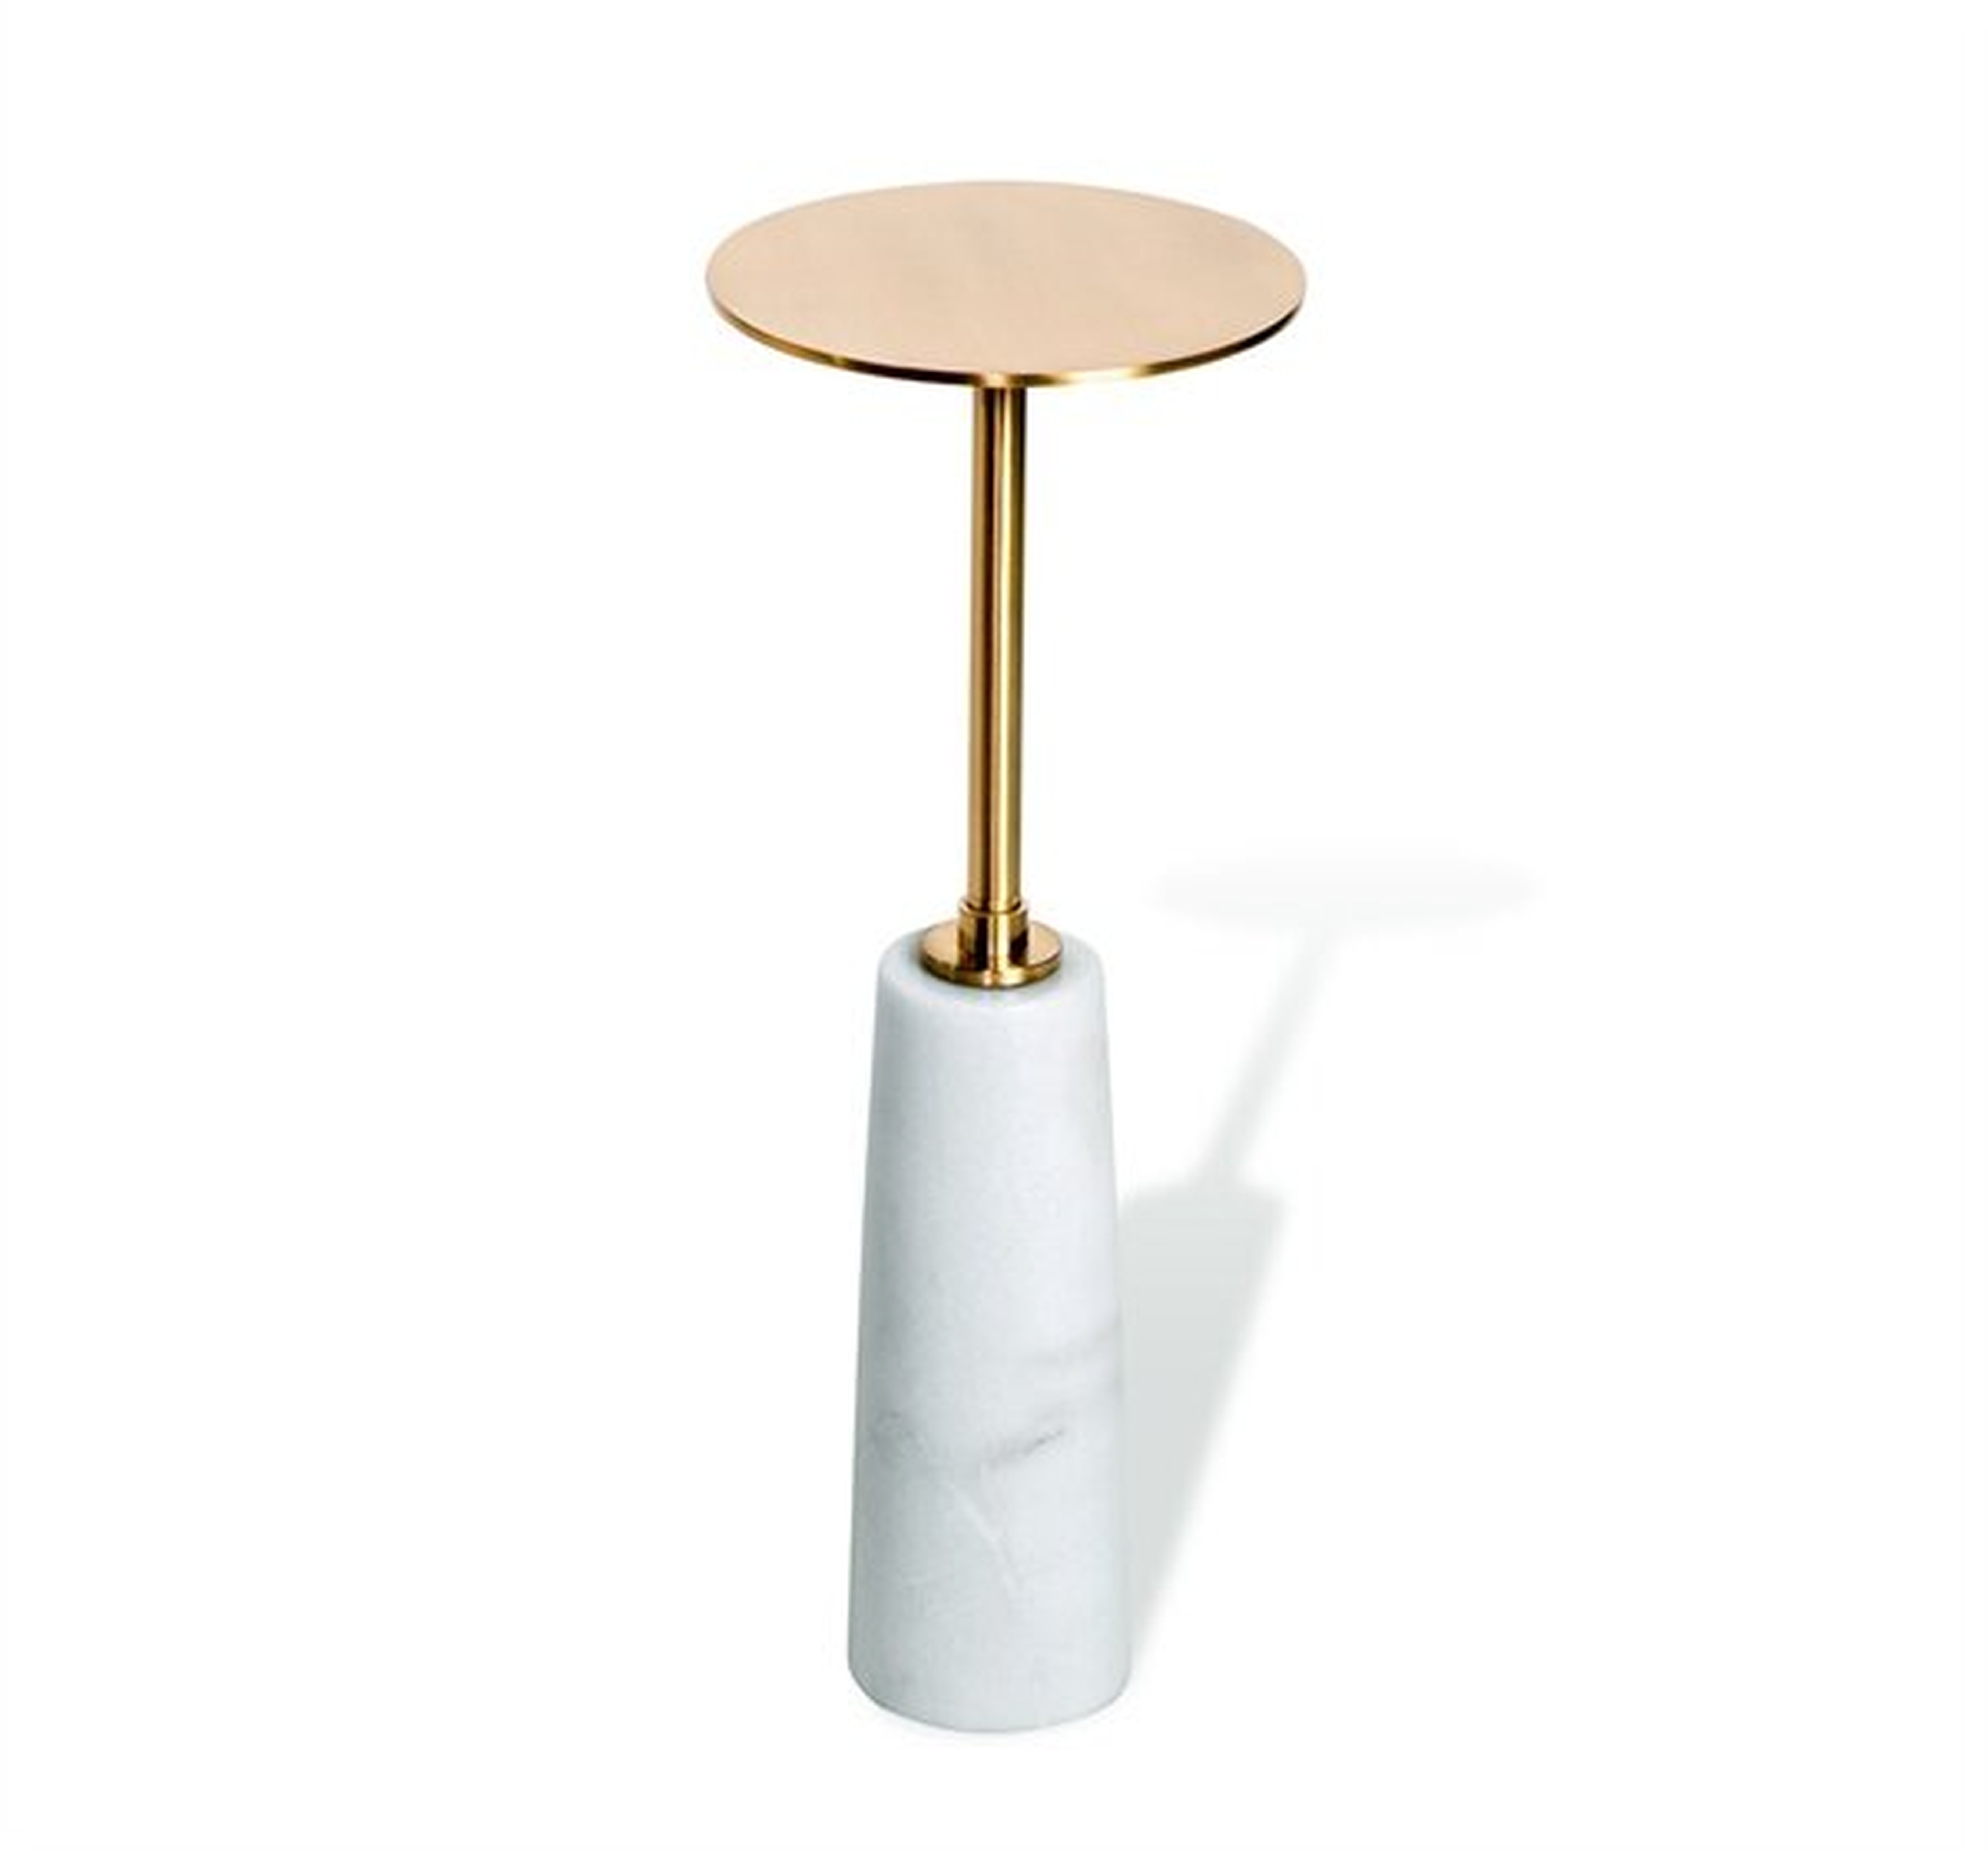 Interlude Beck Drink End Table Table Base Color: White, Table Top Color: Antique Brass - Perigold